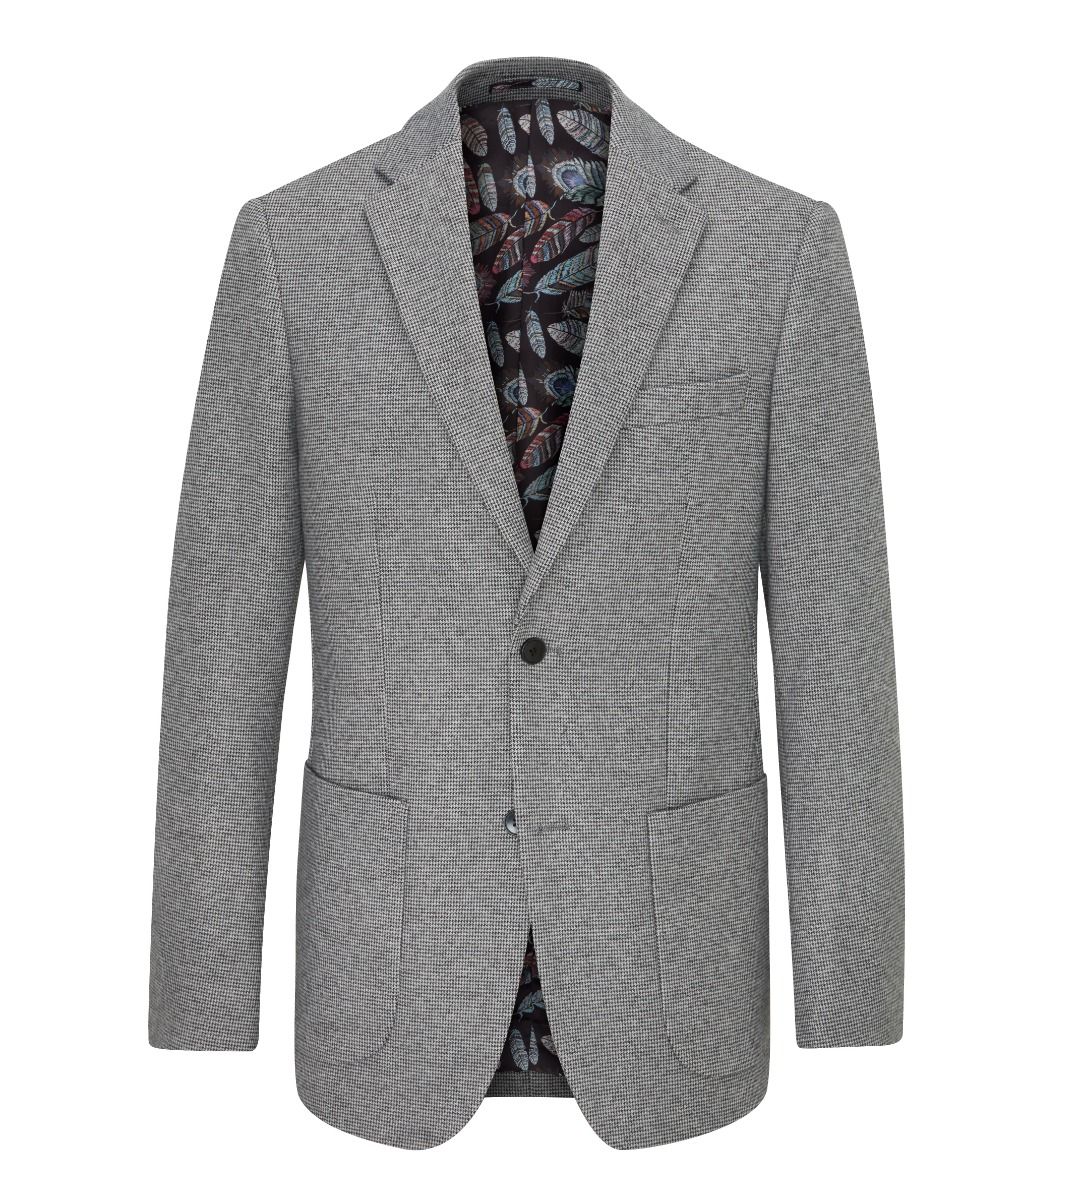 Hastings Tapered Fit Black Grey Blazer-Ghost image view